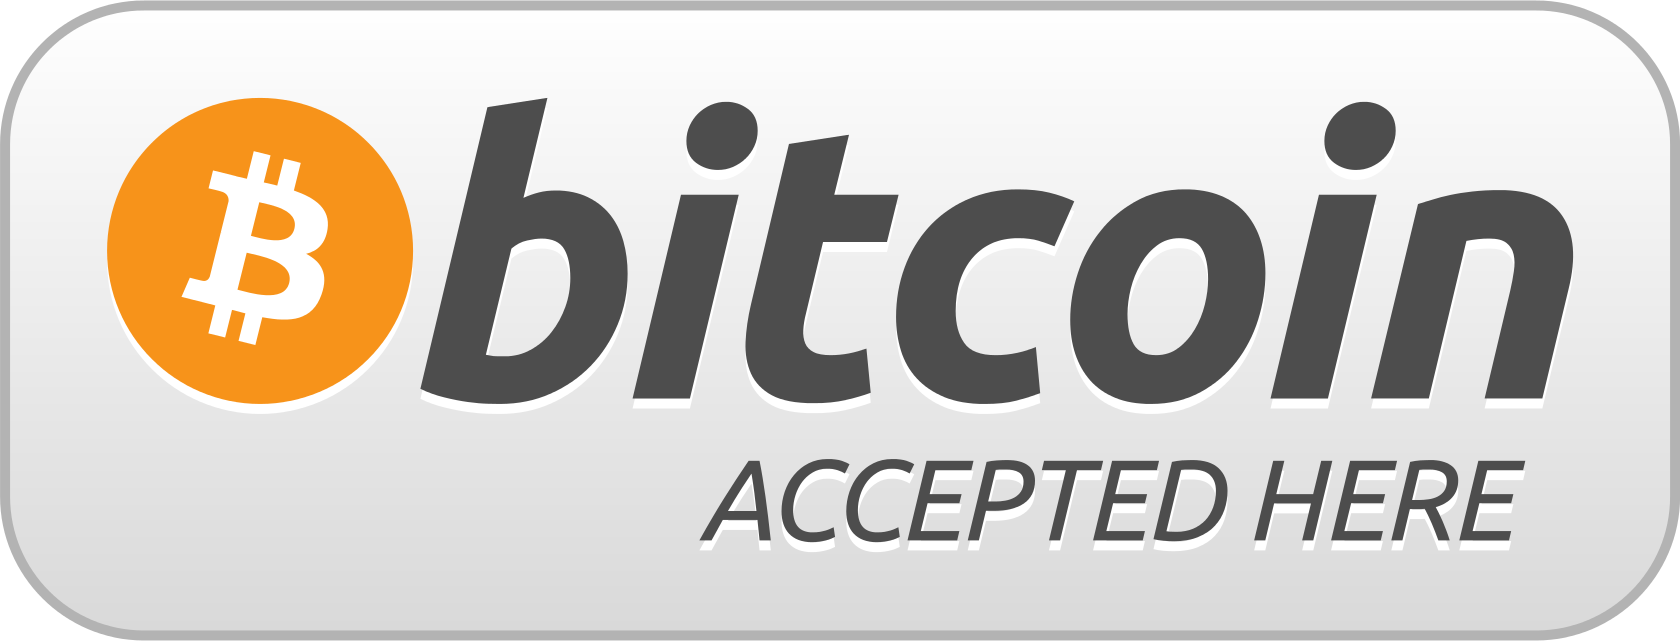 Bitcoin Accepted At Happy Head